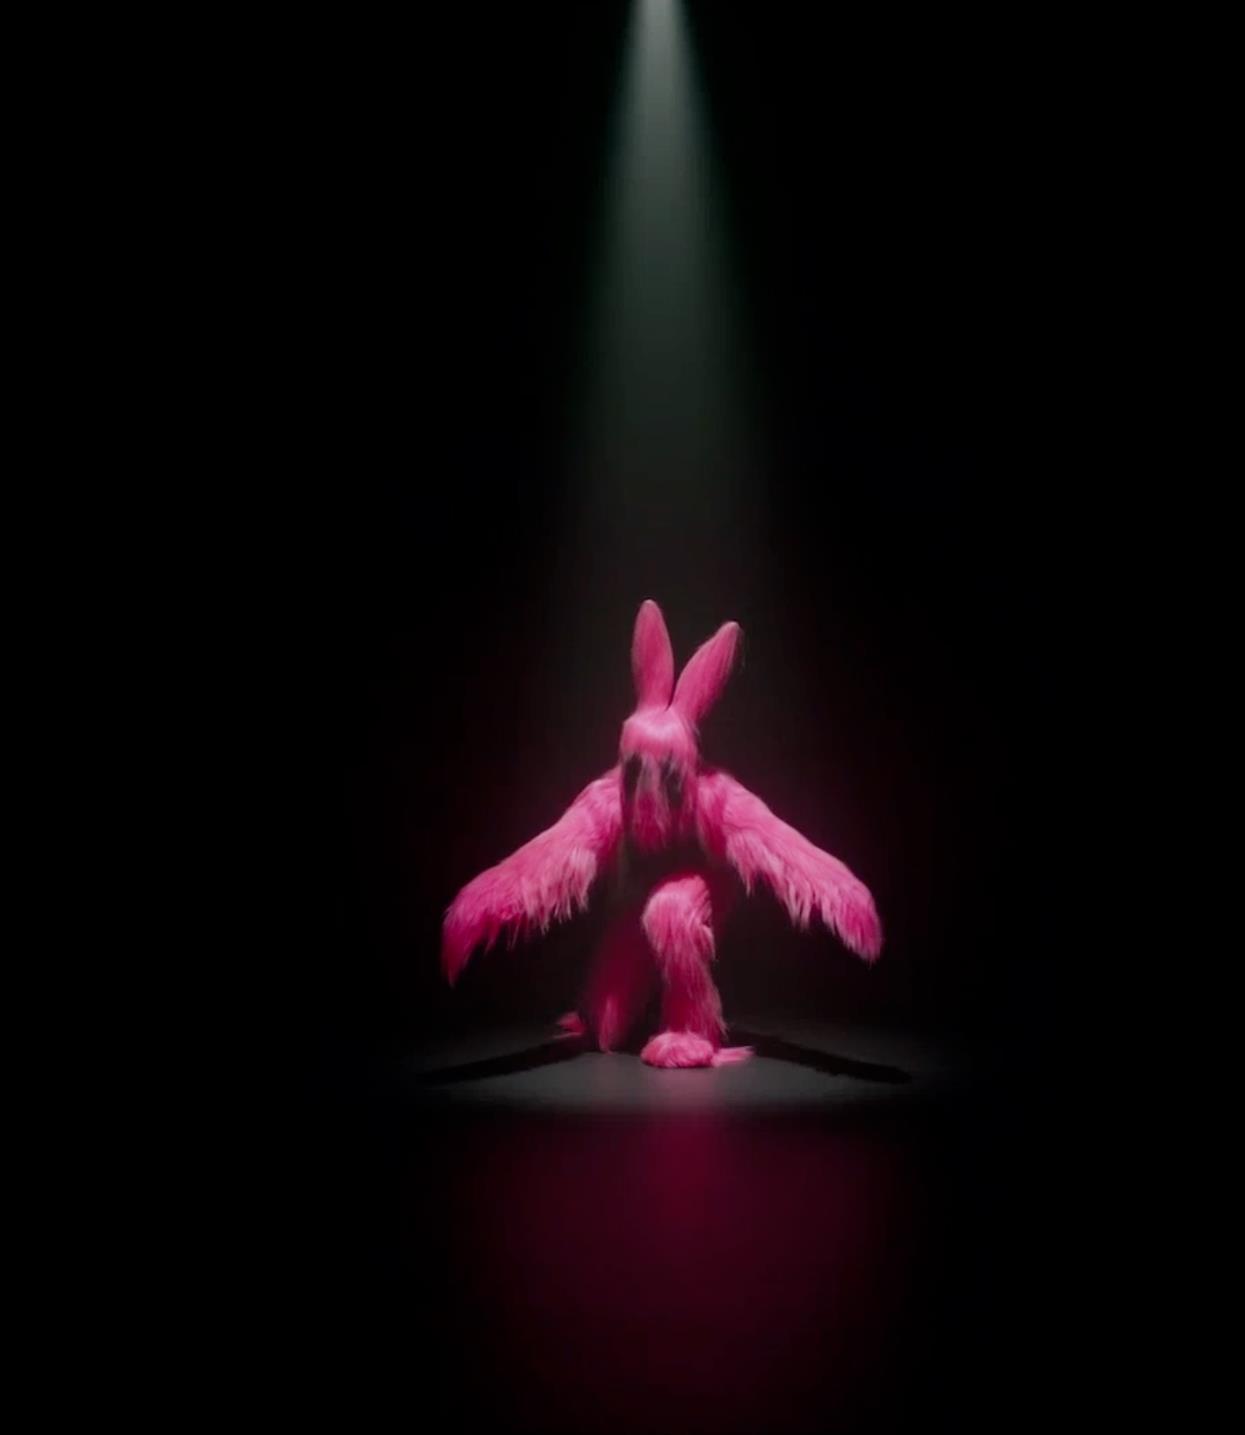 A performer costumed in a pink feathery bunny suit crouches with one leg forward, arms extended